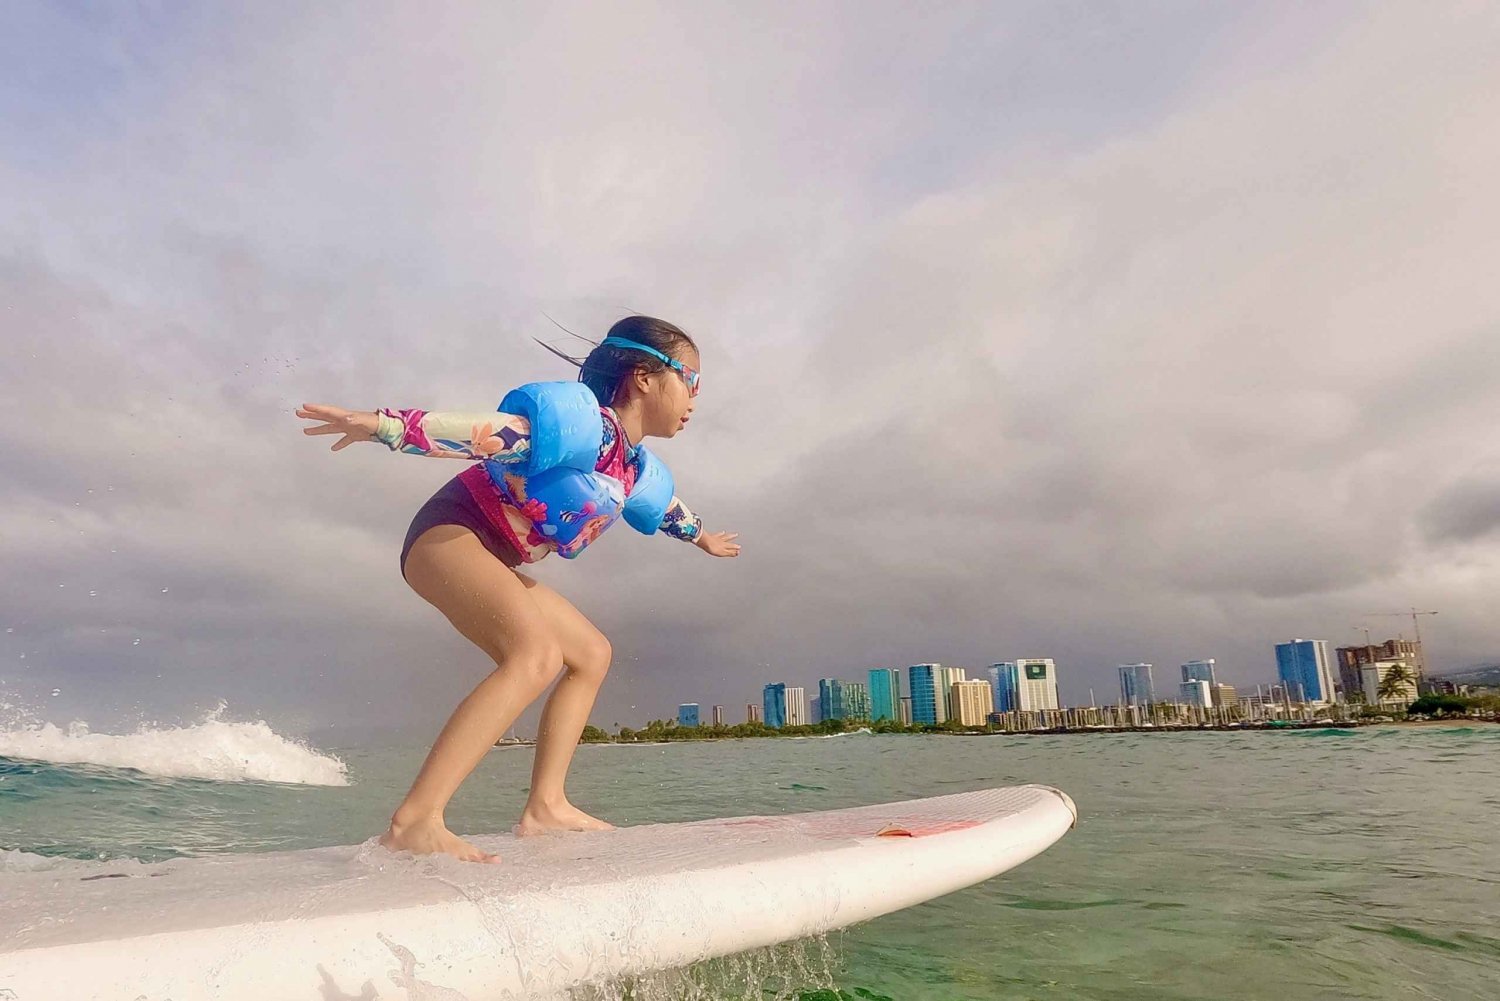 Waikiki: 2-Hour Private or Group Surfing Lesson for Kids